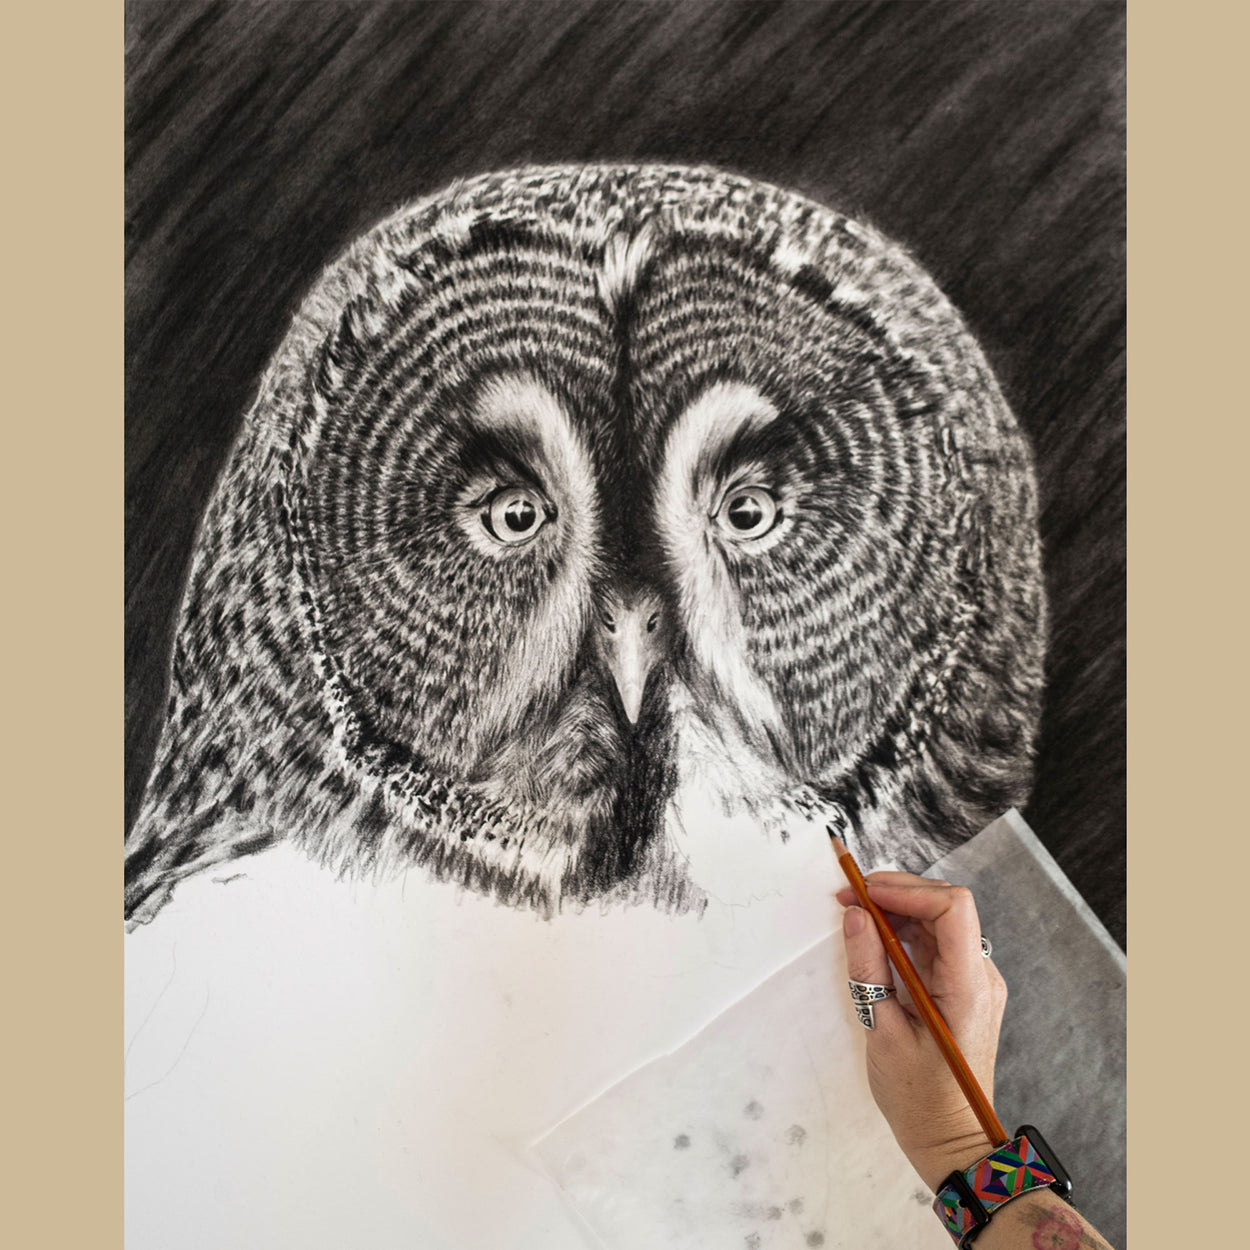 Hand holding pencil over a half completed black and white drawing of a great grey owl